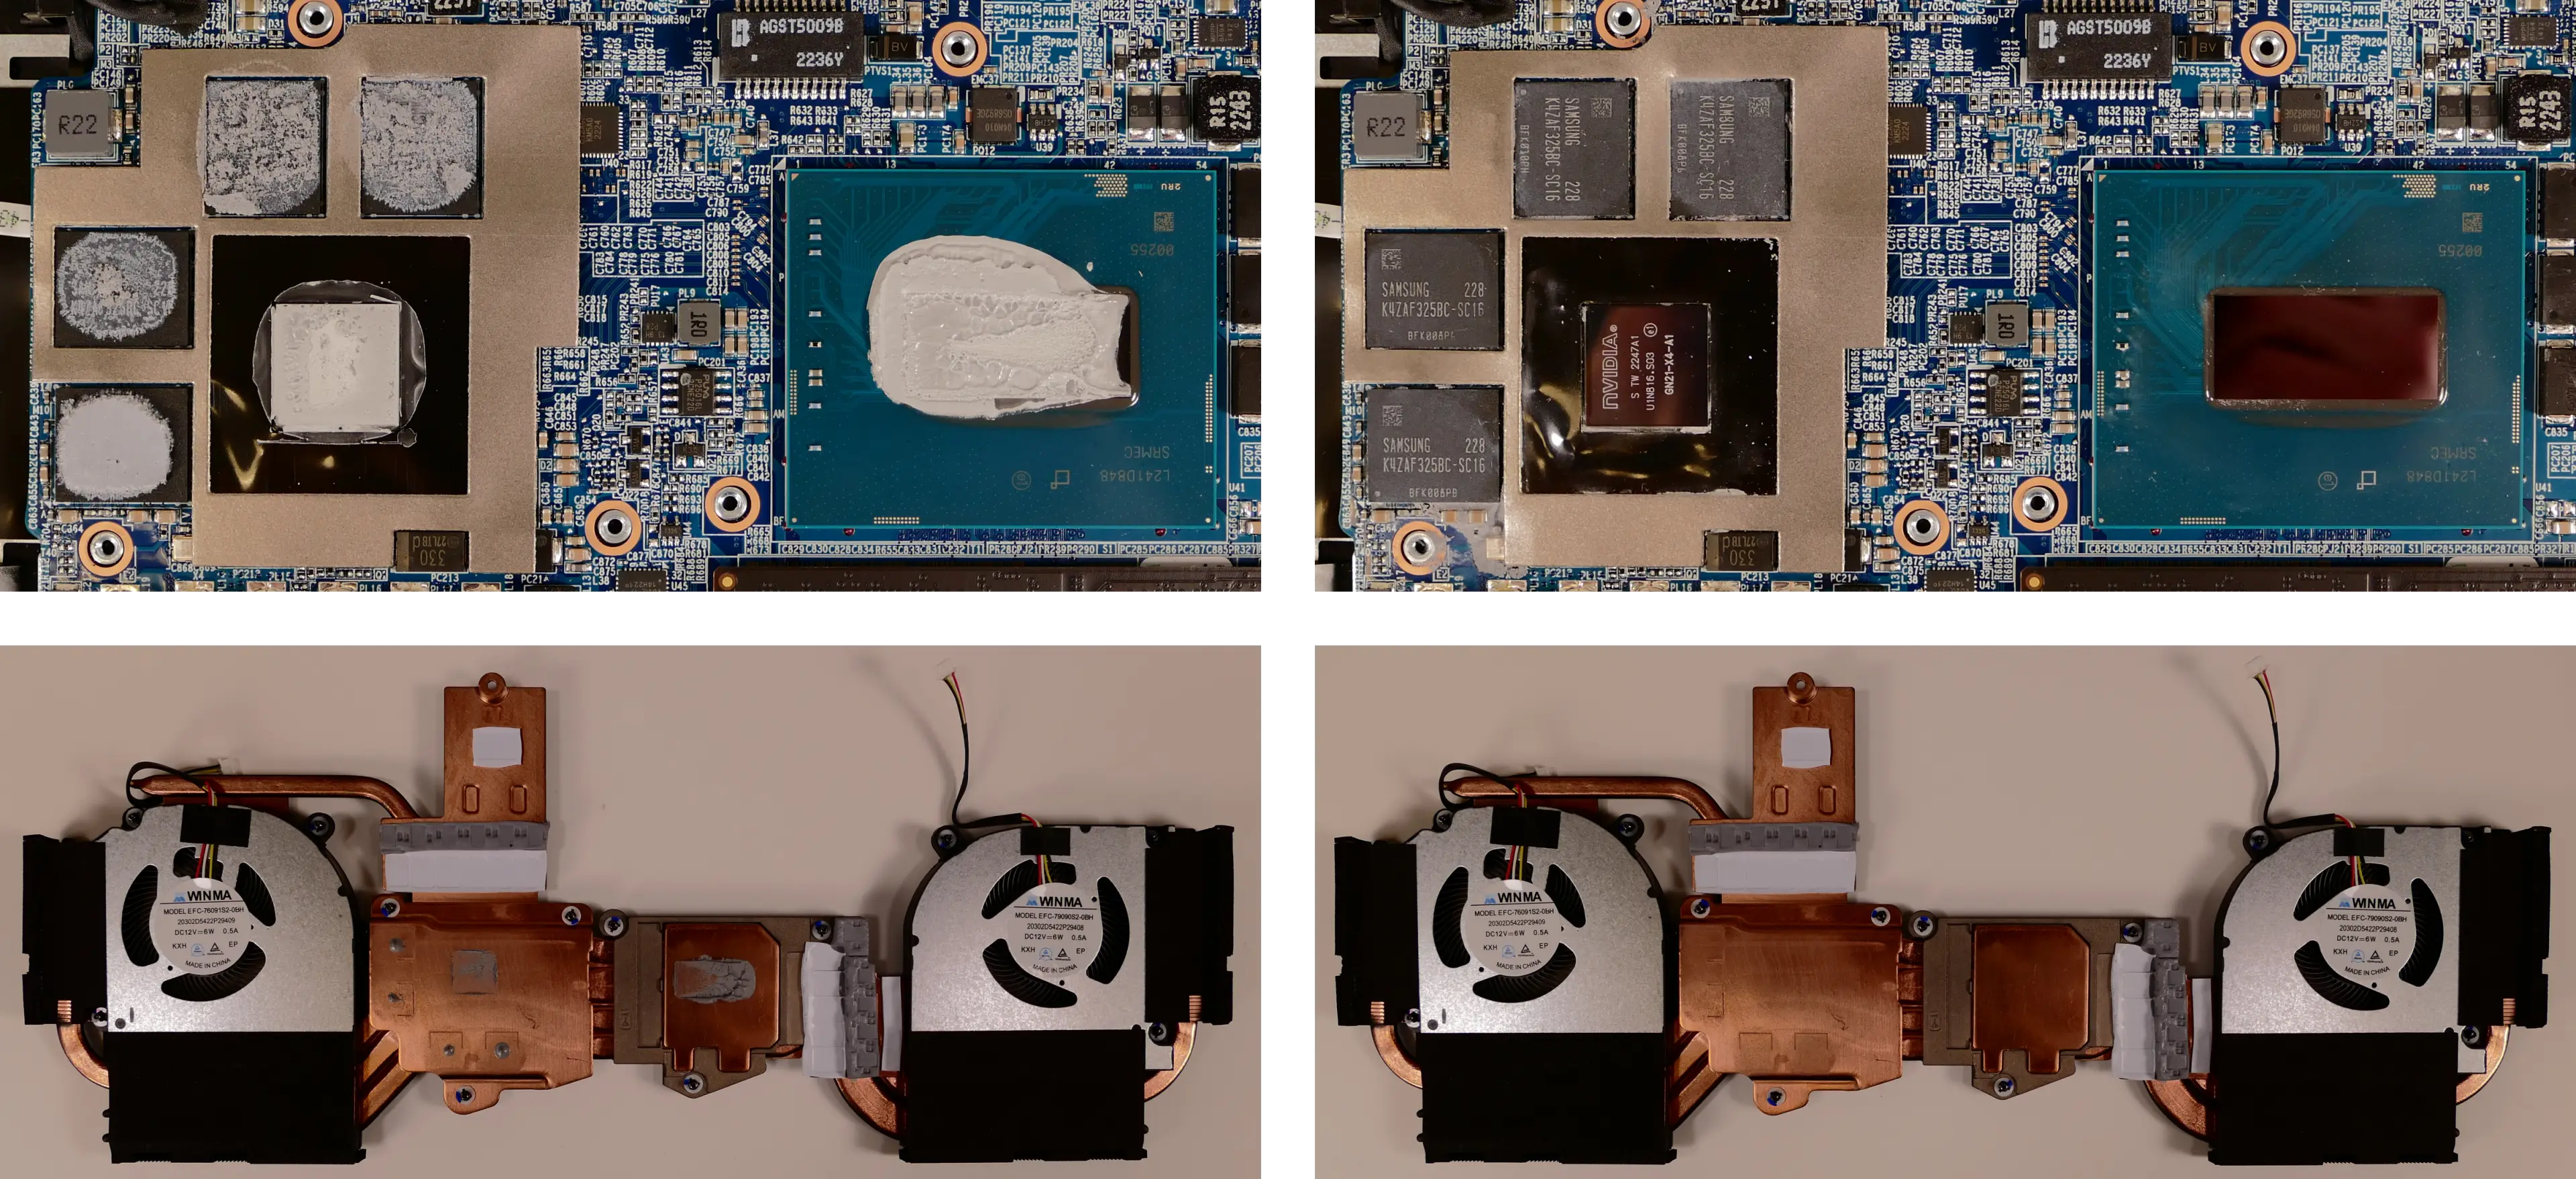 Thermal paste removal